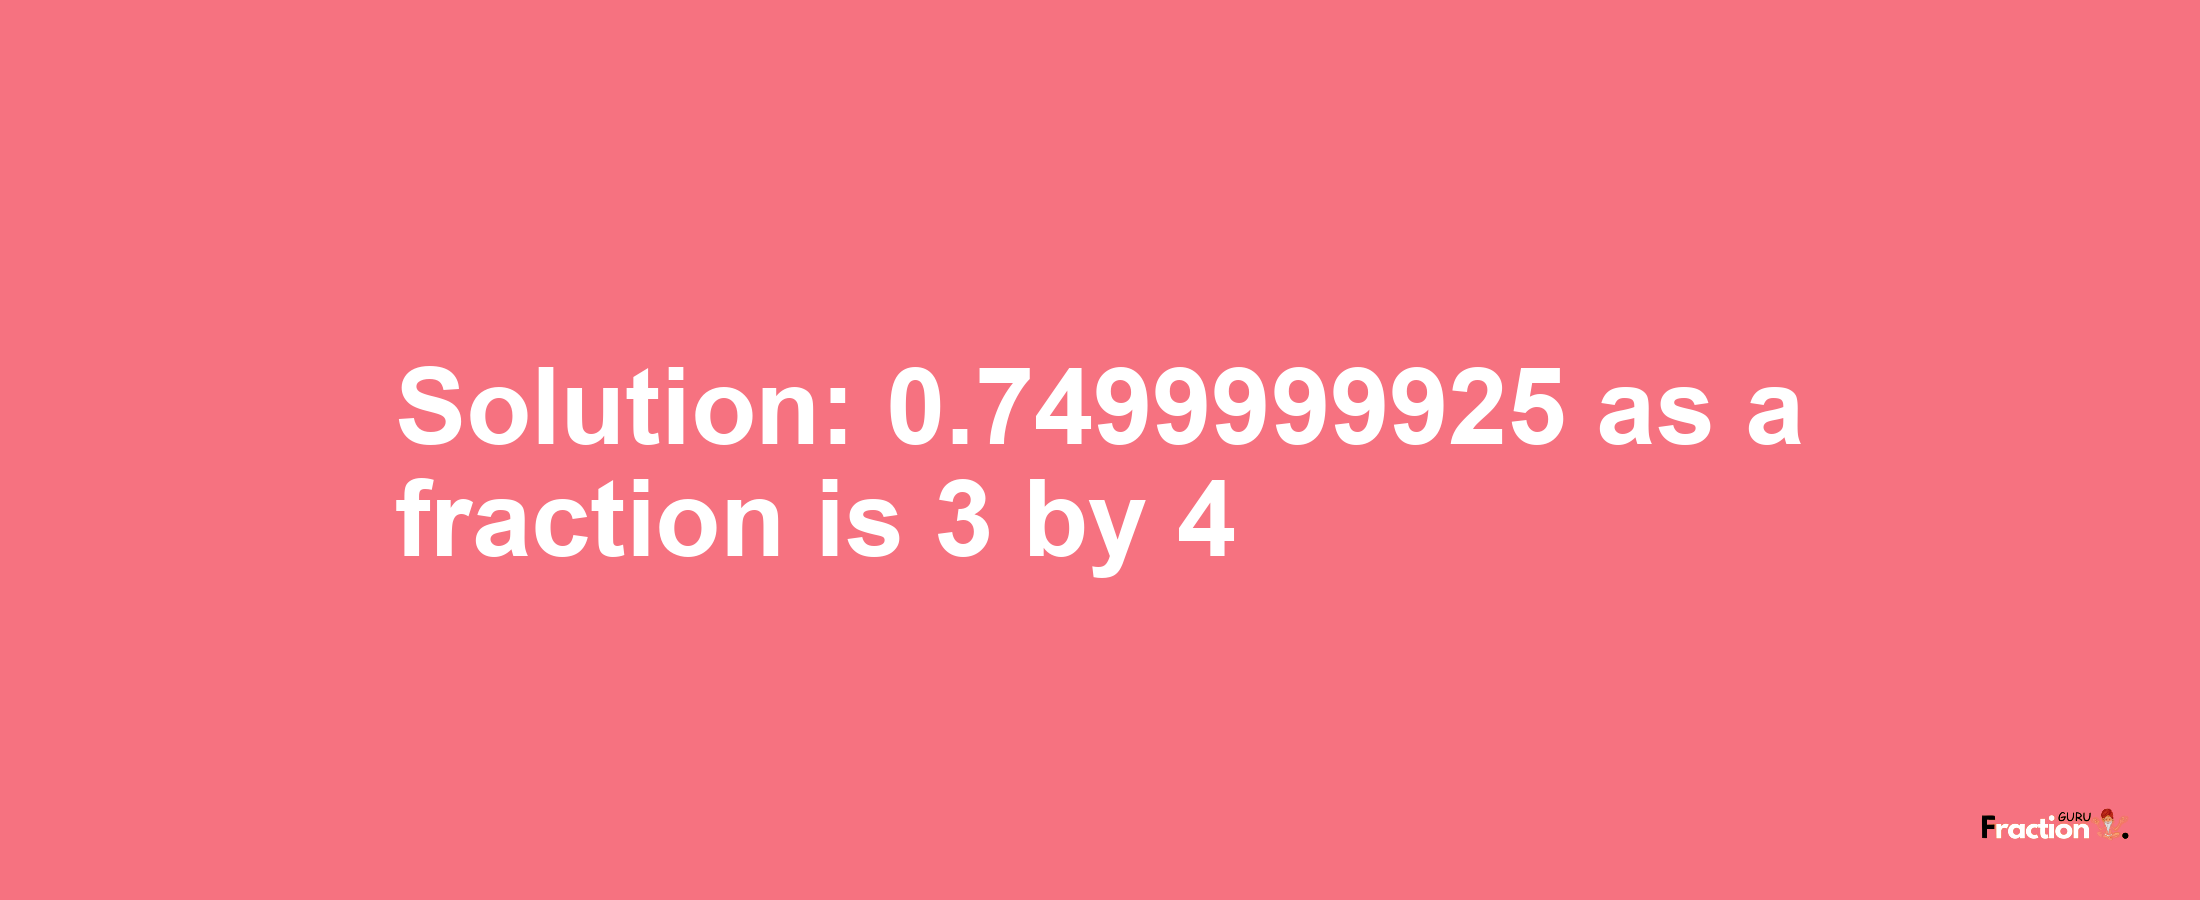 Solution:0.7499999925 as a fraction is 3/4